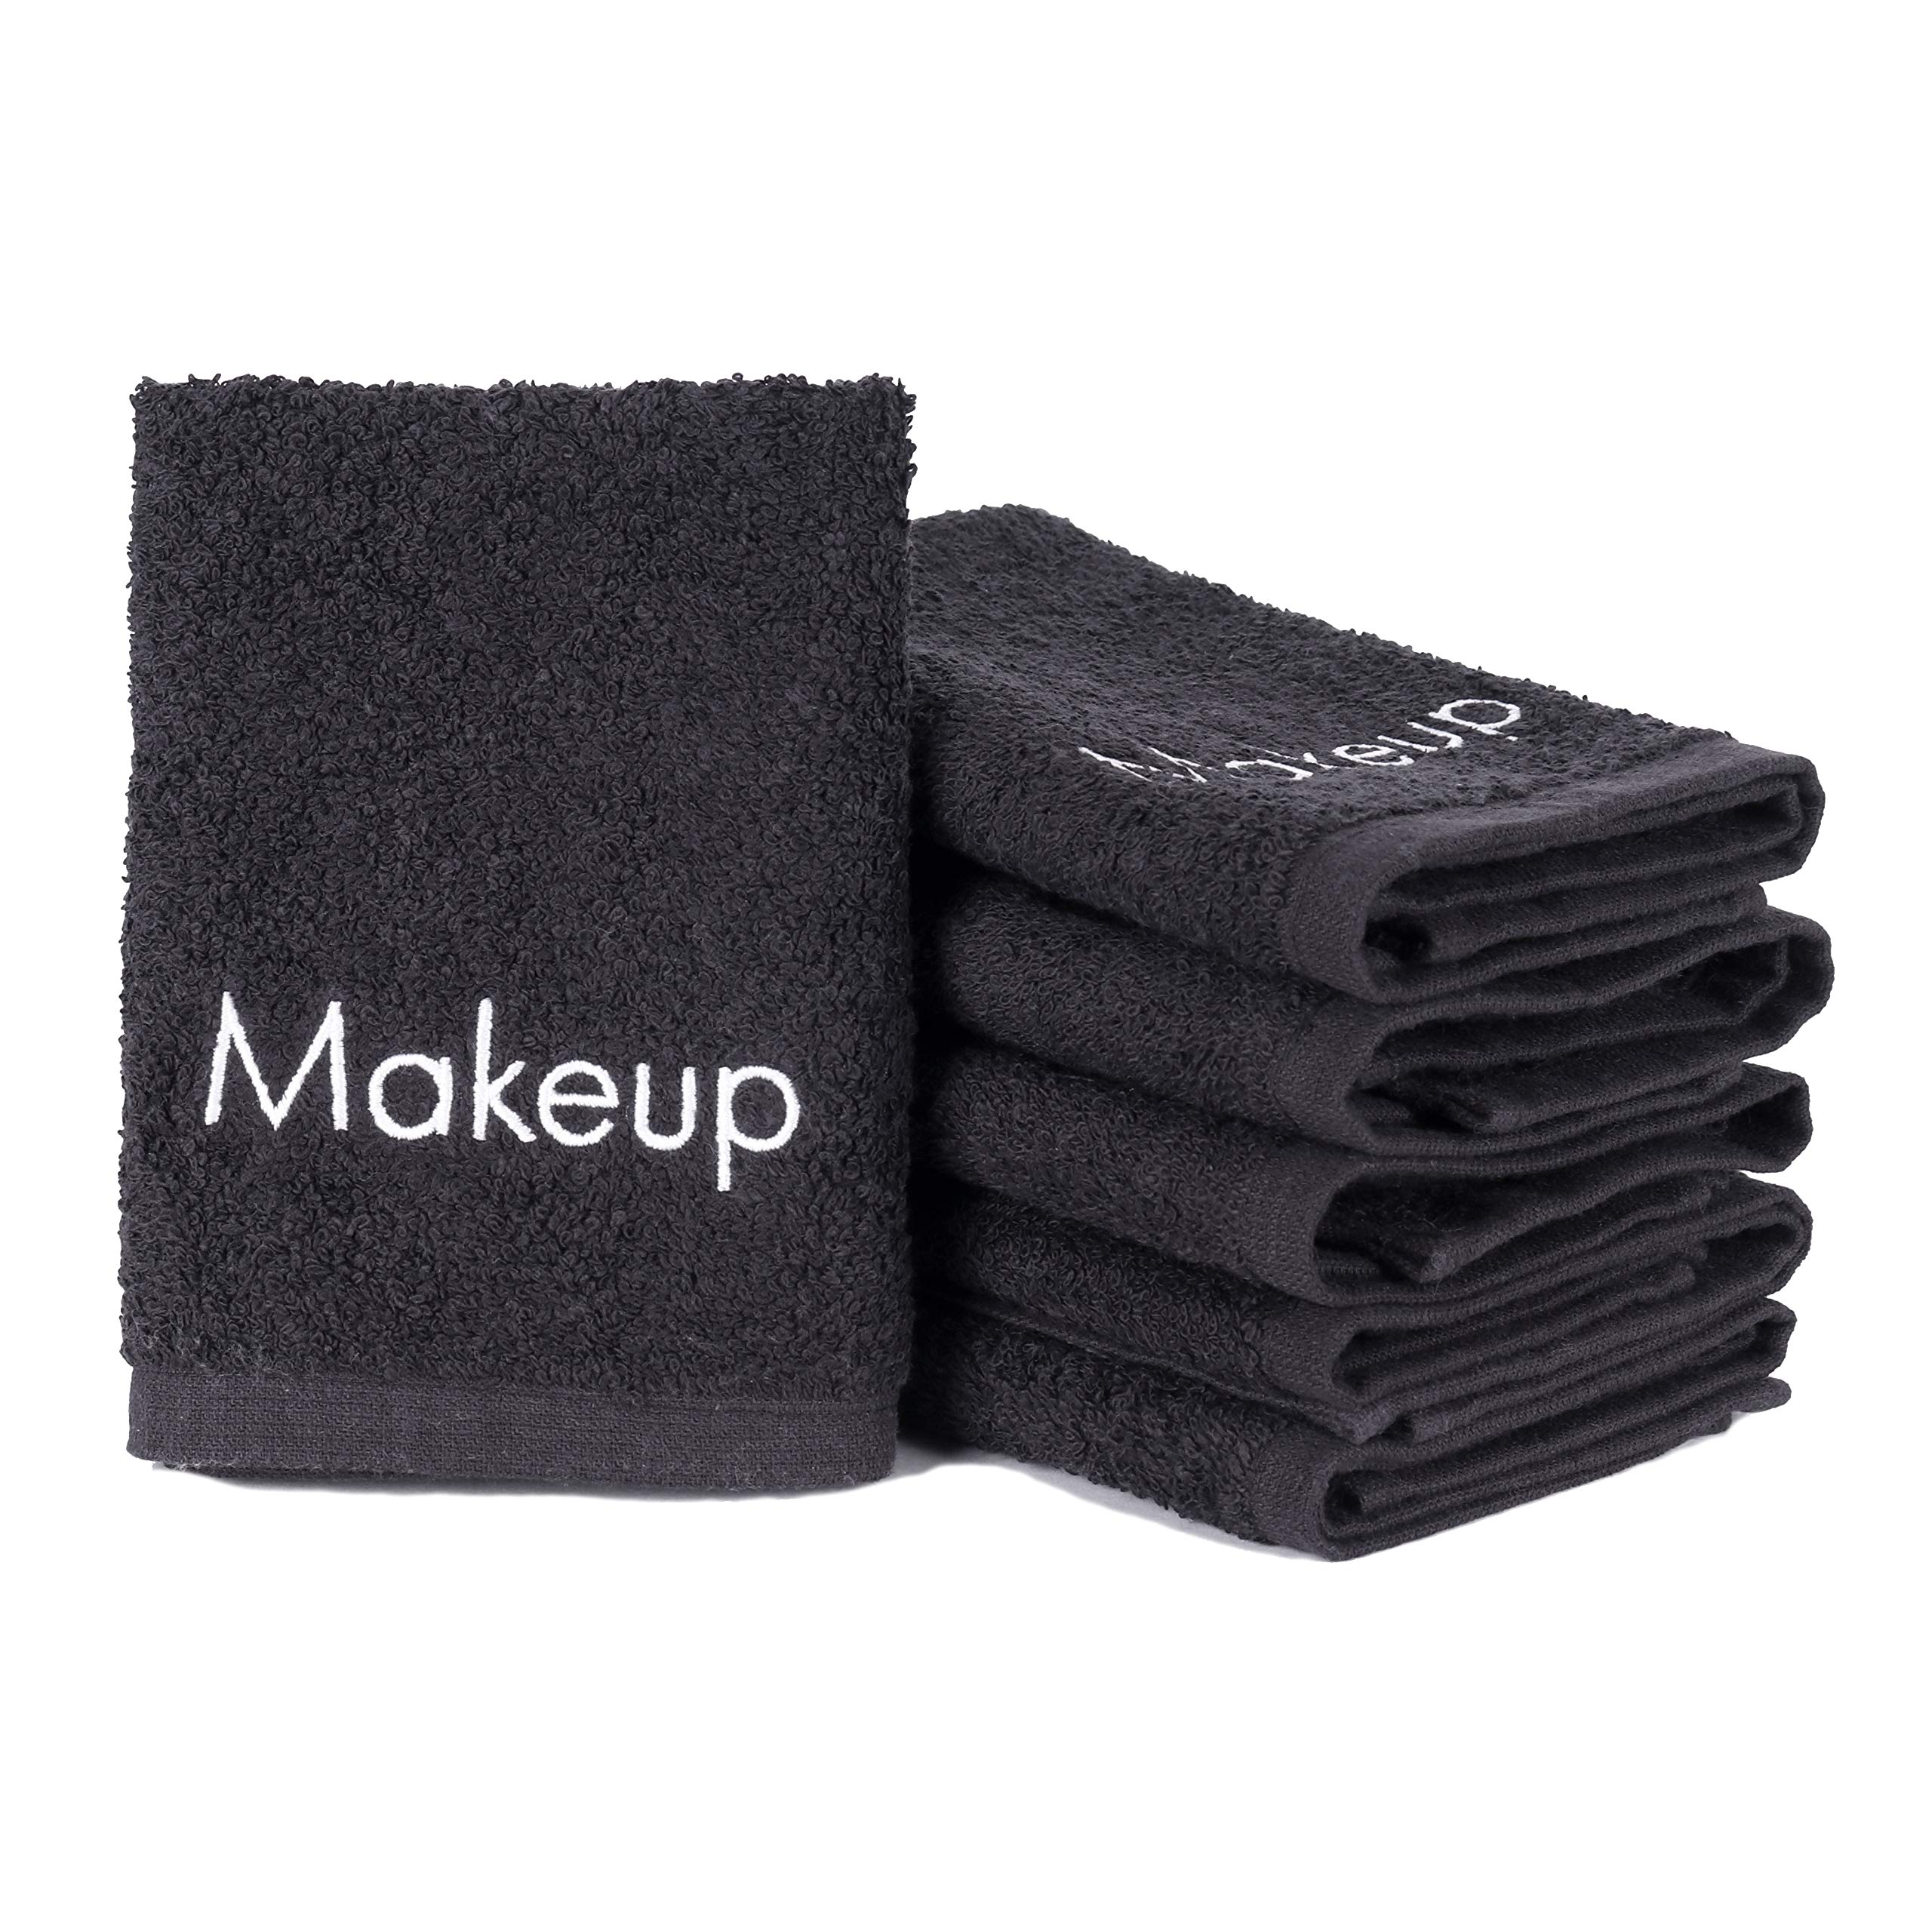 All about: Take It Off makeup removal towels